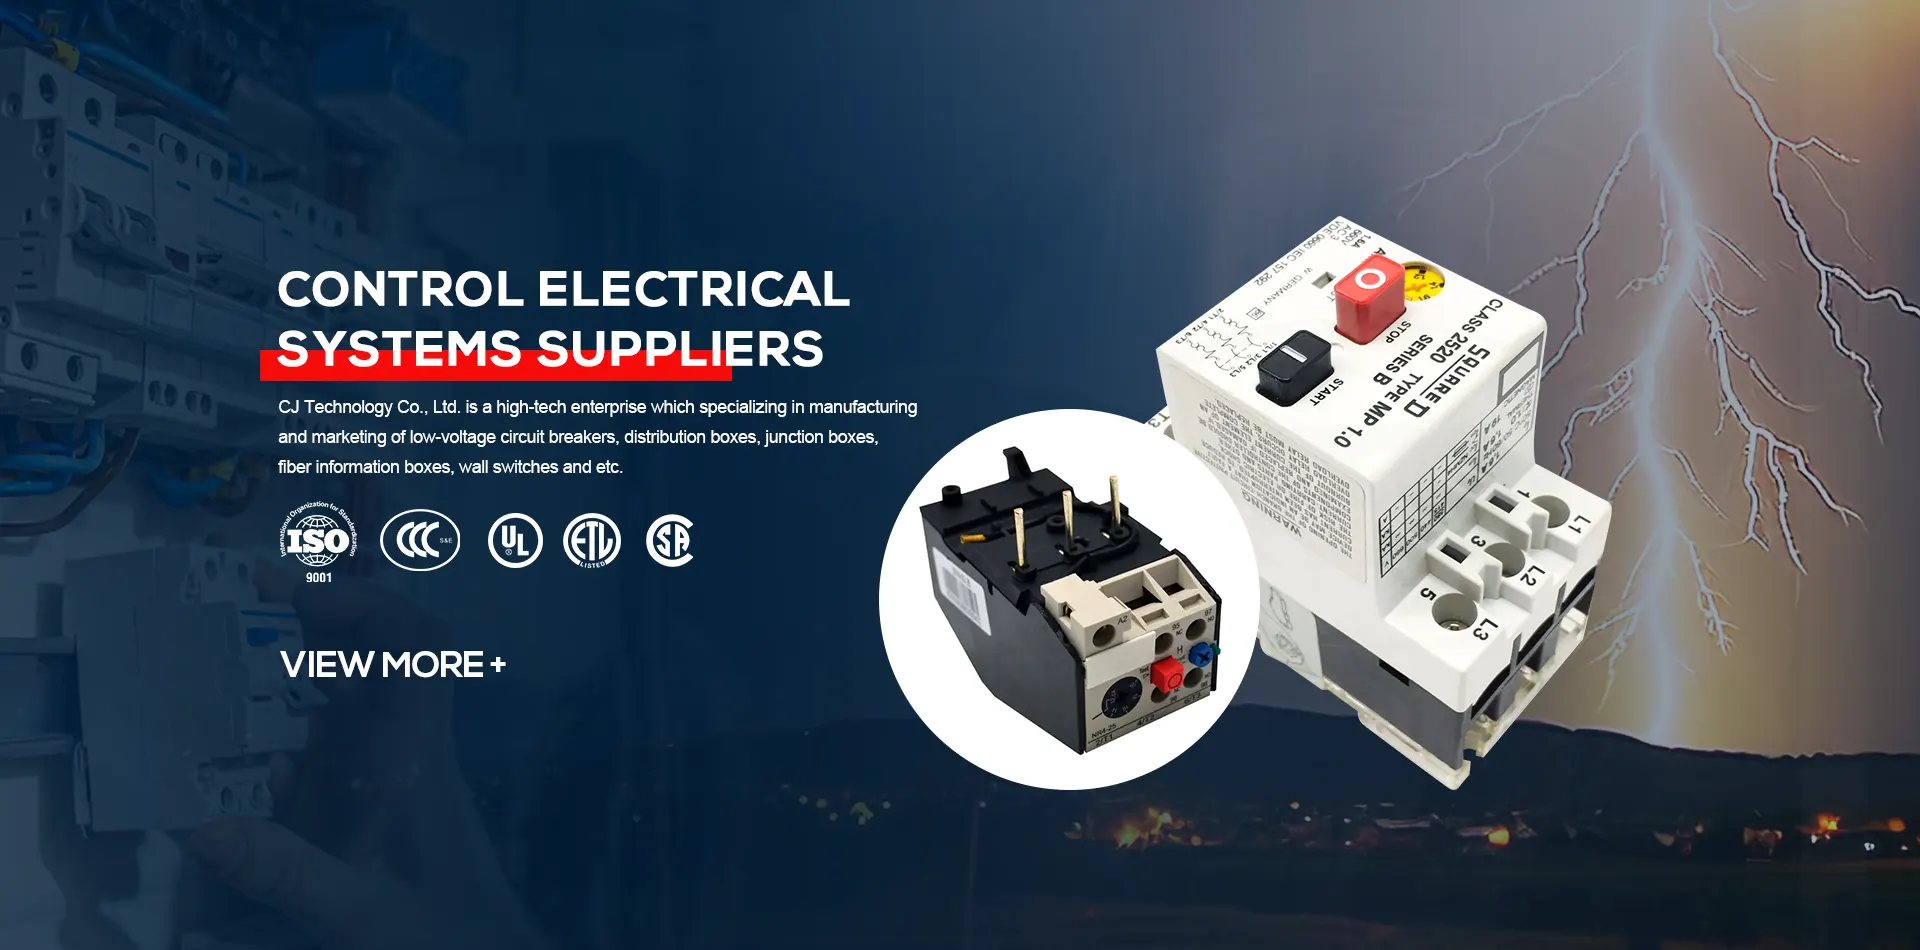 Control Electrical Systems Suppliers